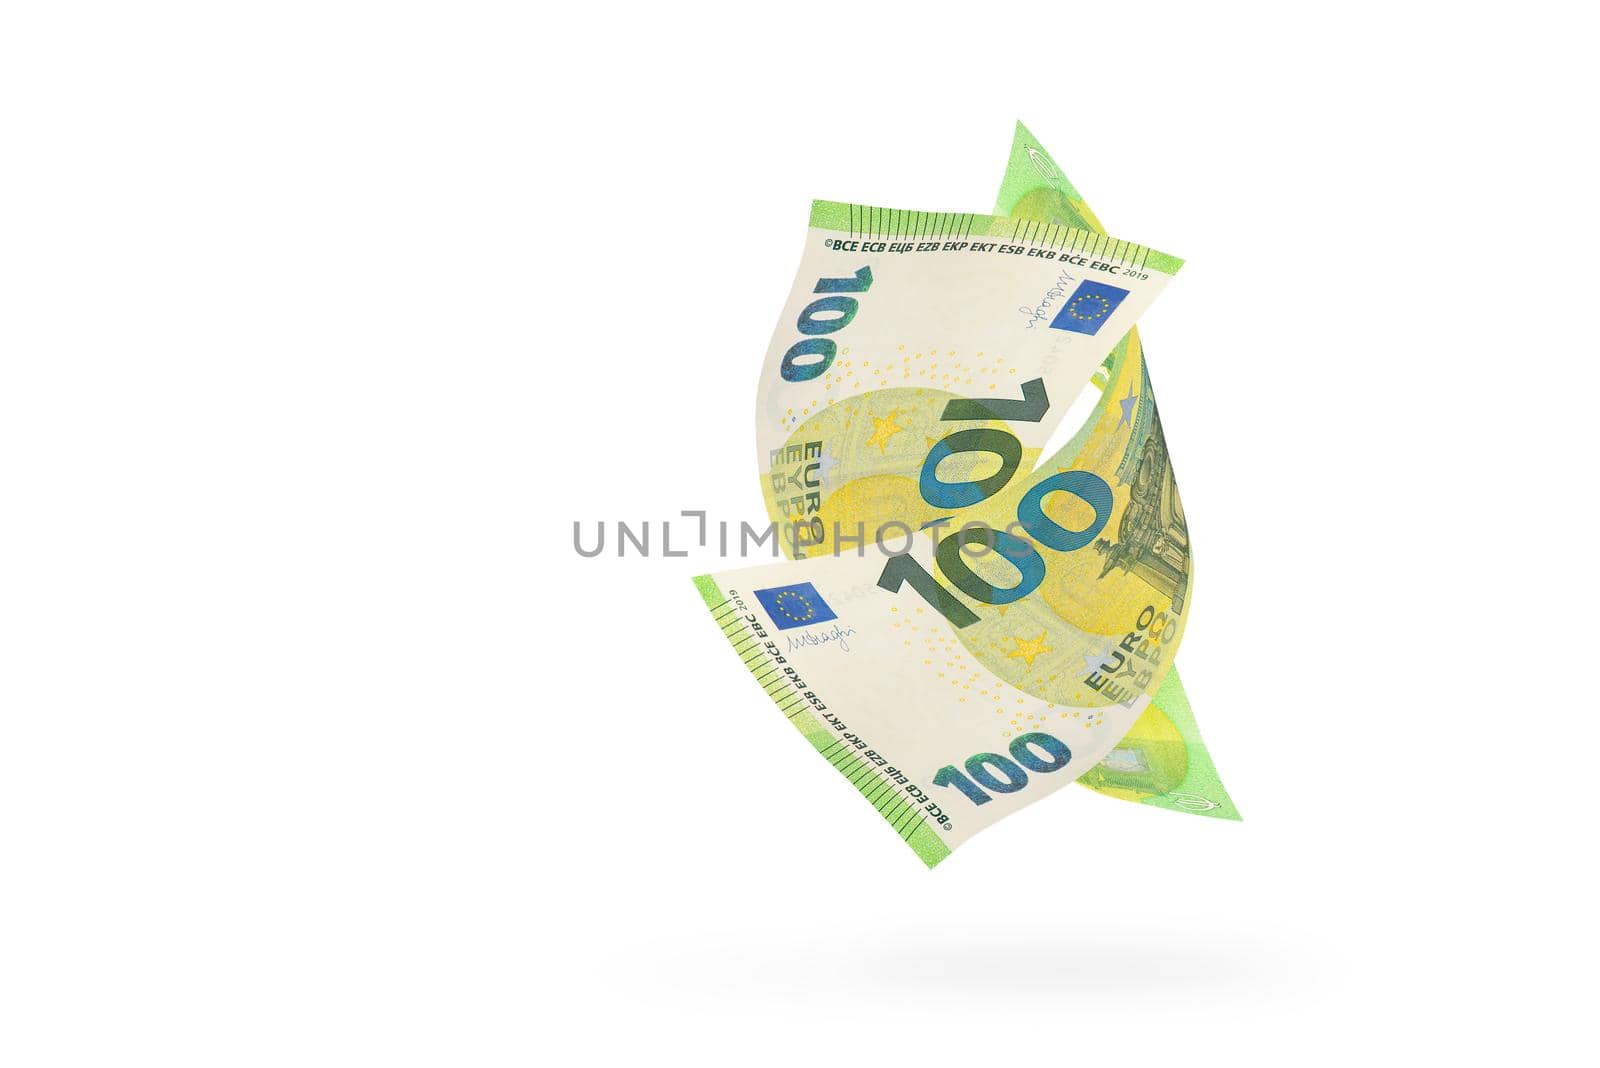 One hundred euro banknote isolated on white background. European money folded in half, close-up of money casts a shadow. Two euro banknotes intertwined in the air.